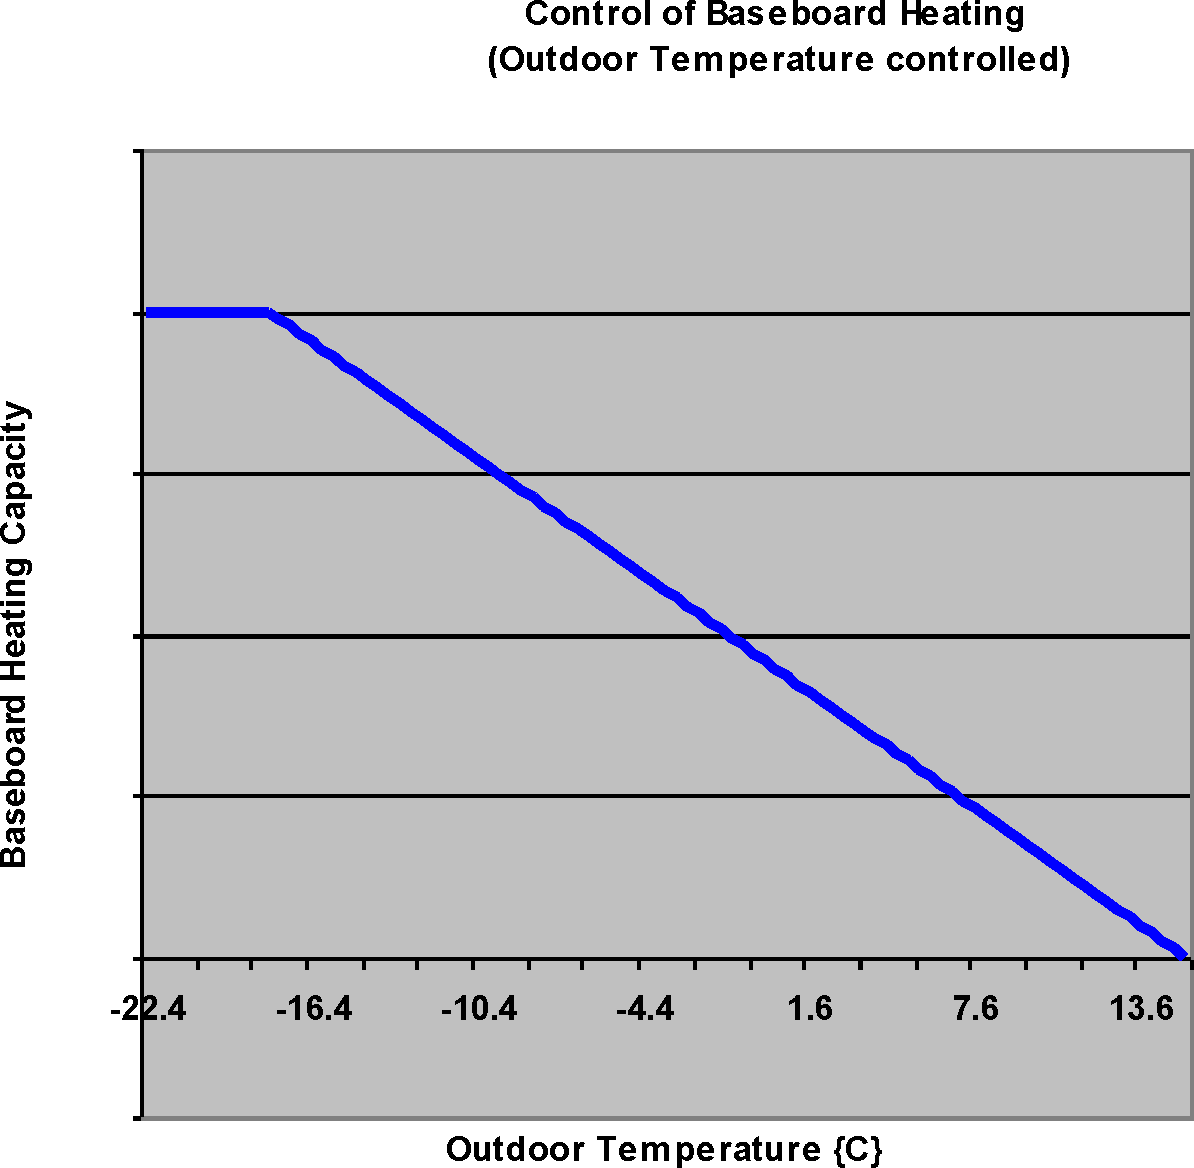 Control of Outdoor Temperature Controlled Baseboard Heat [fig:control-of-outdoor-temperature-controlled]